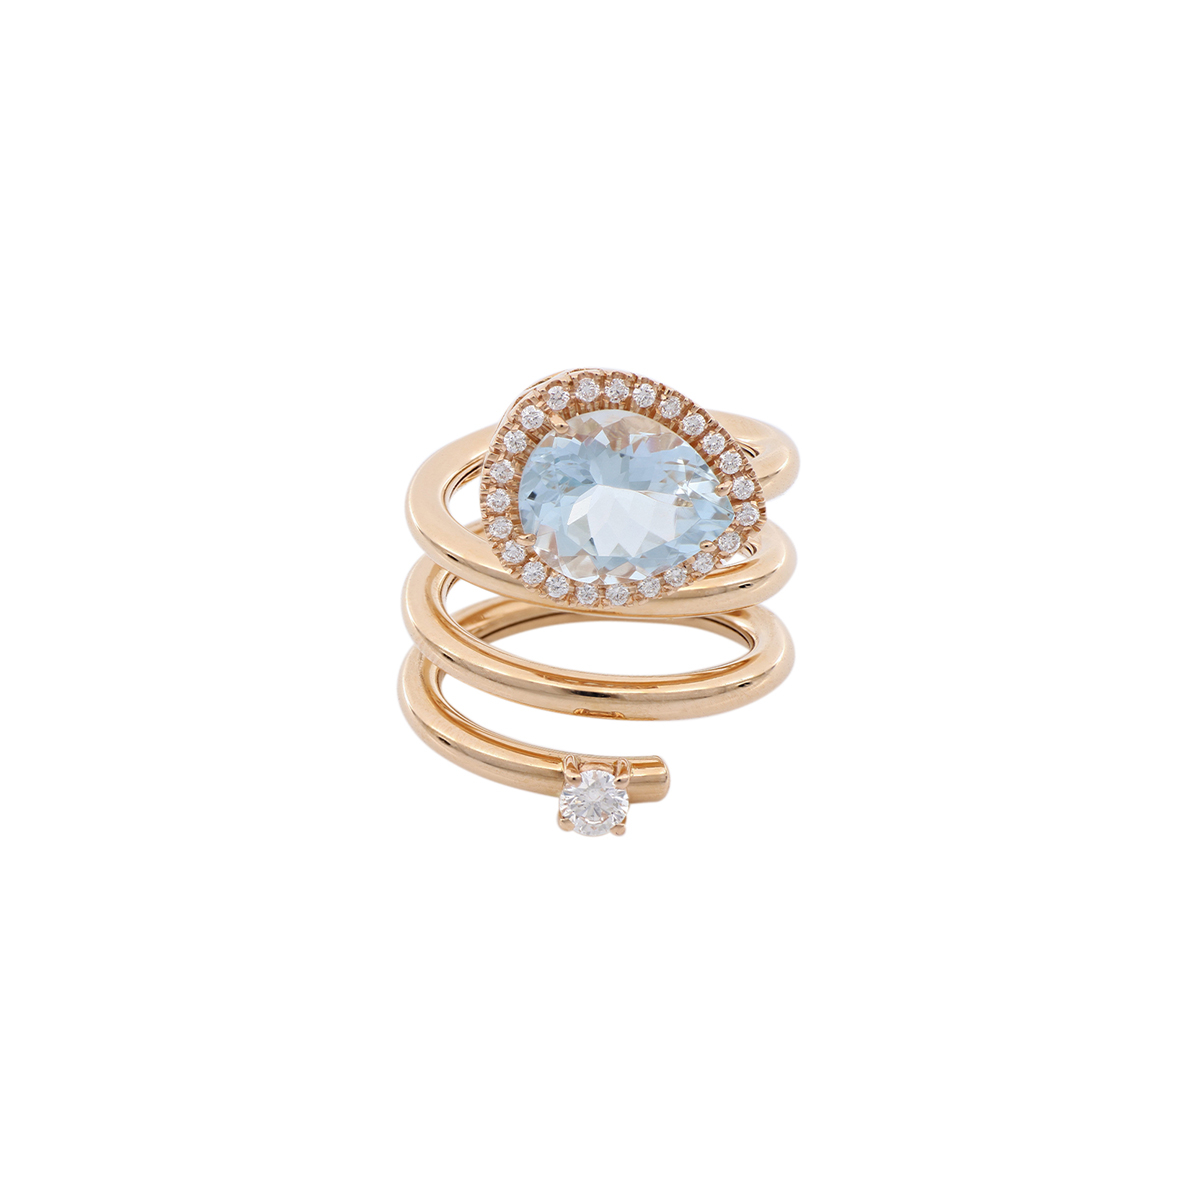 Spiral Ring with Pear-Cut Aquamarine and Diamond Halo